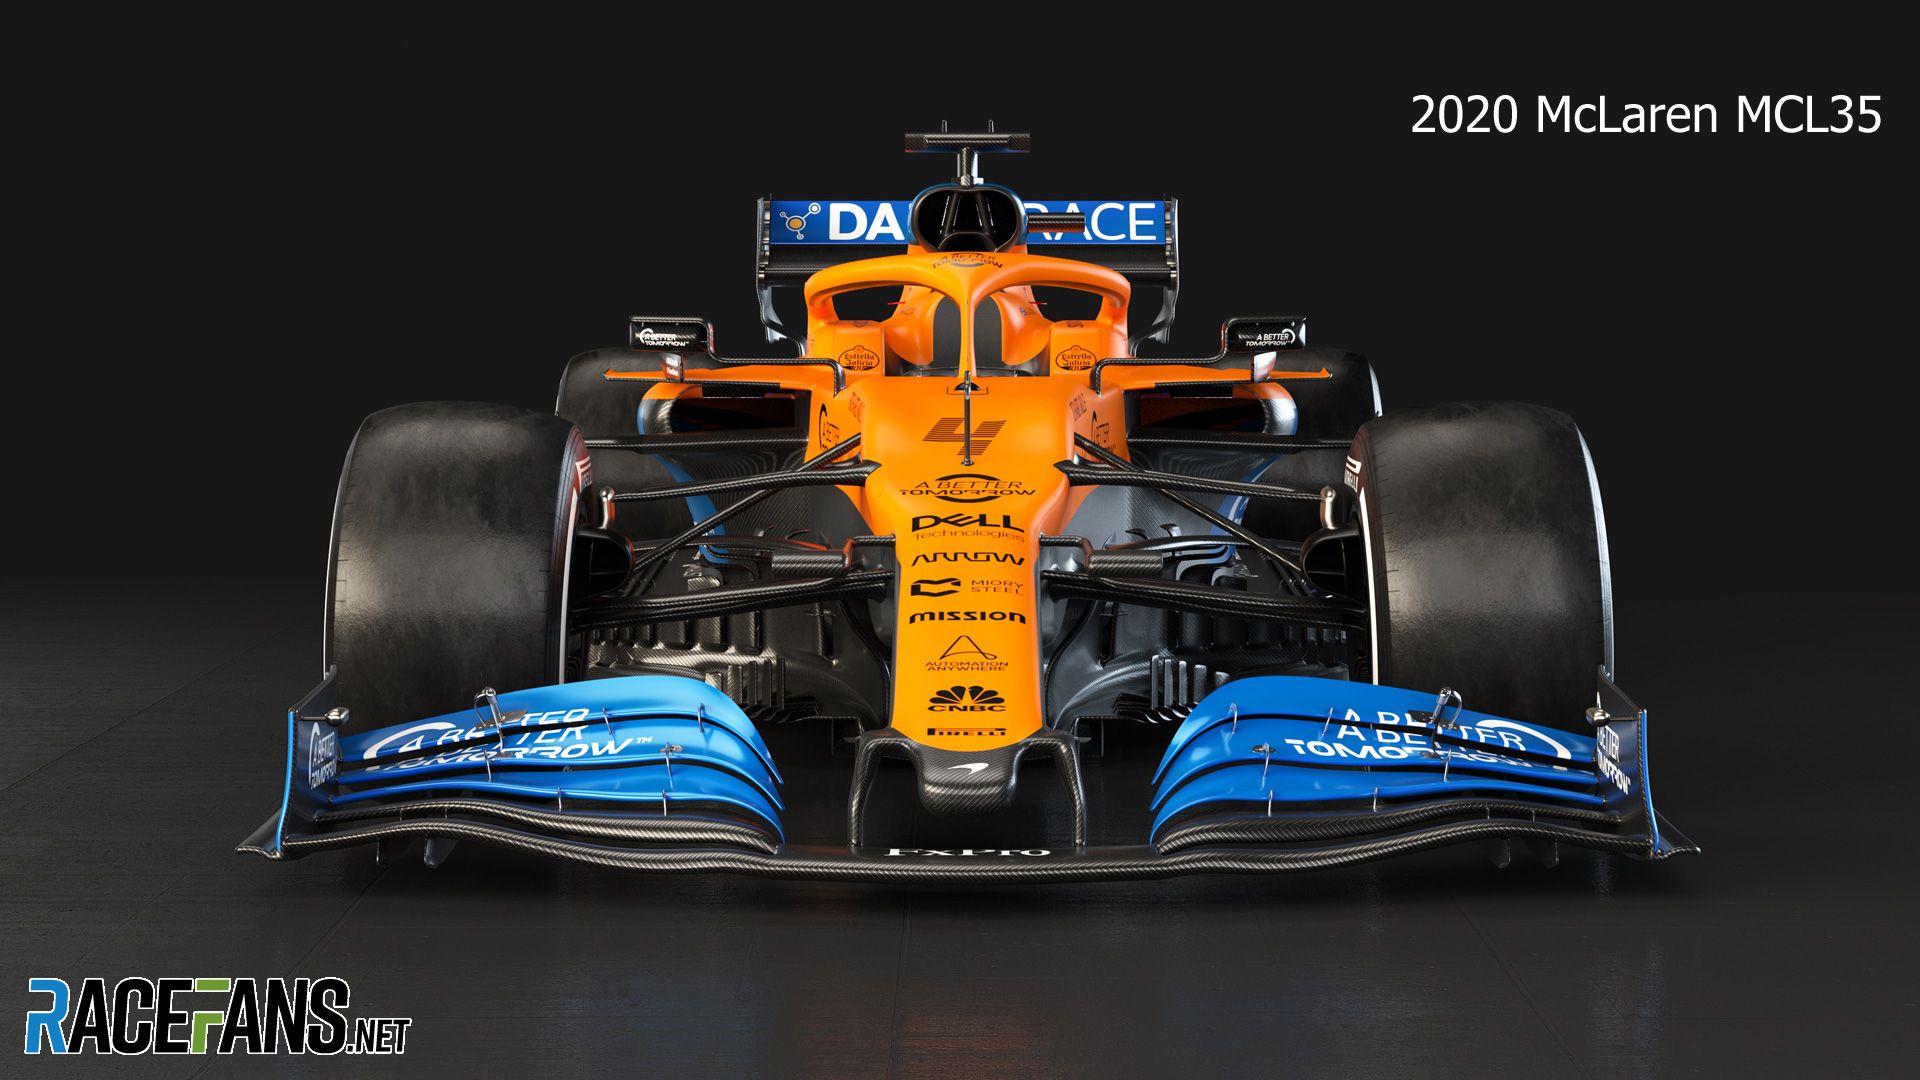 Interactive: Compare The New McLaren Mercedes MCL35M With Last Year's Car · RaceFans